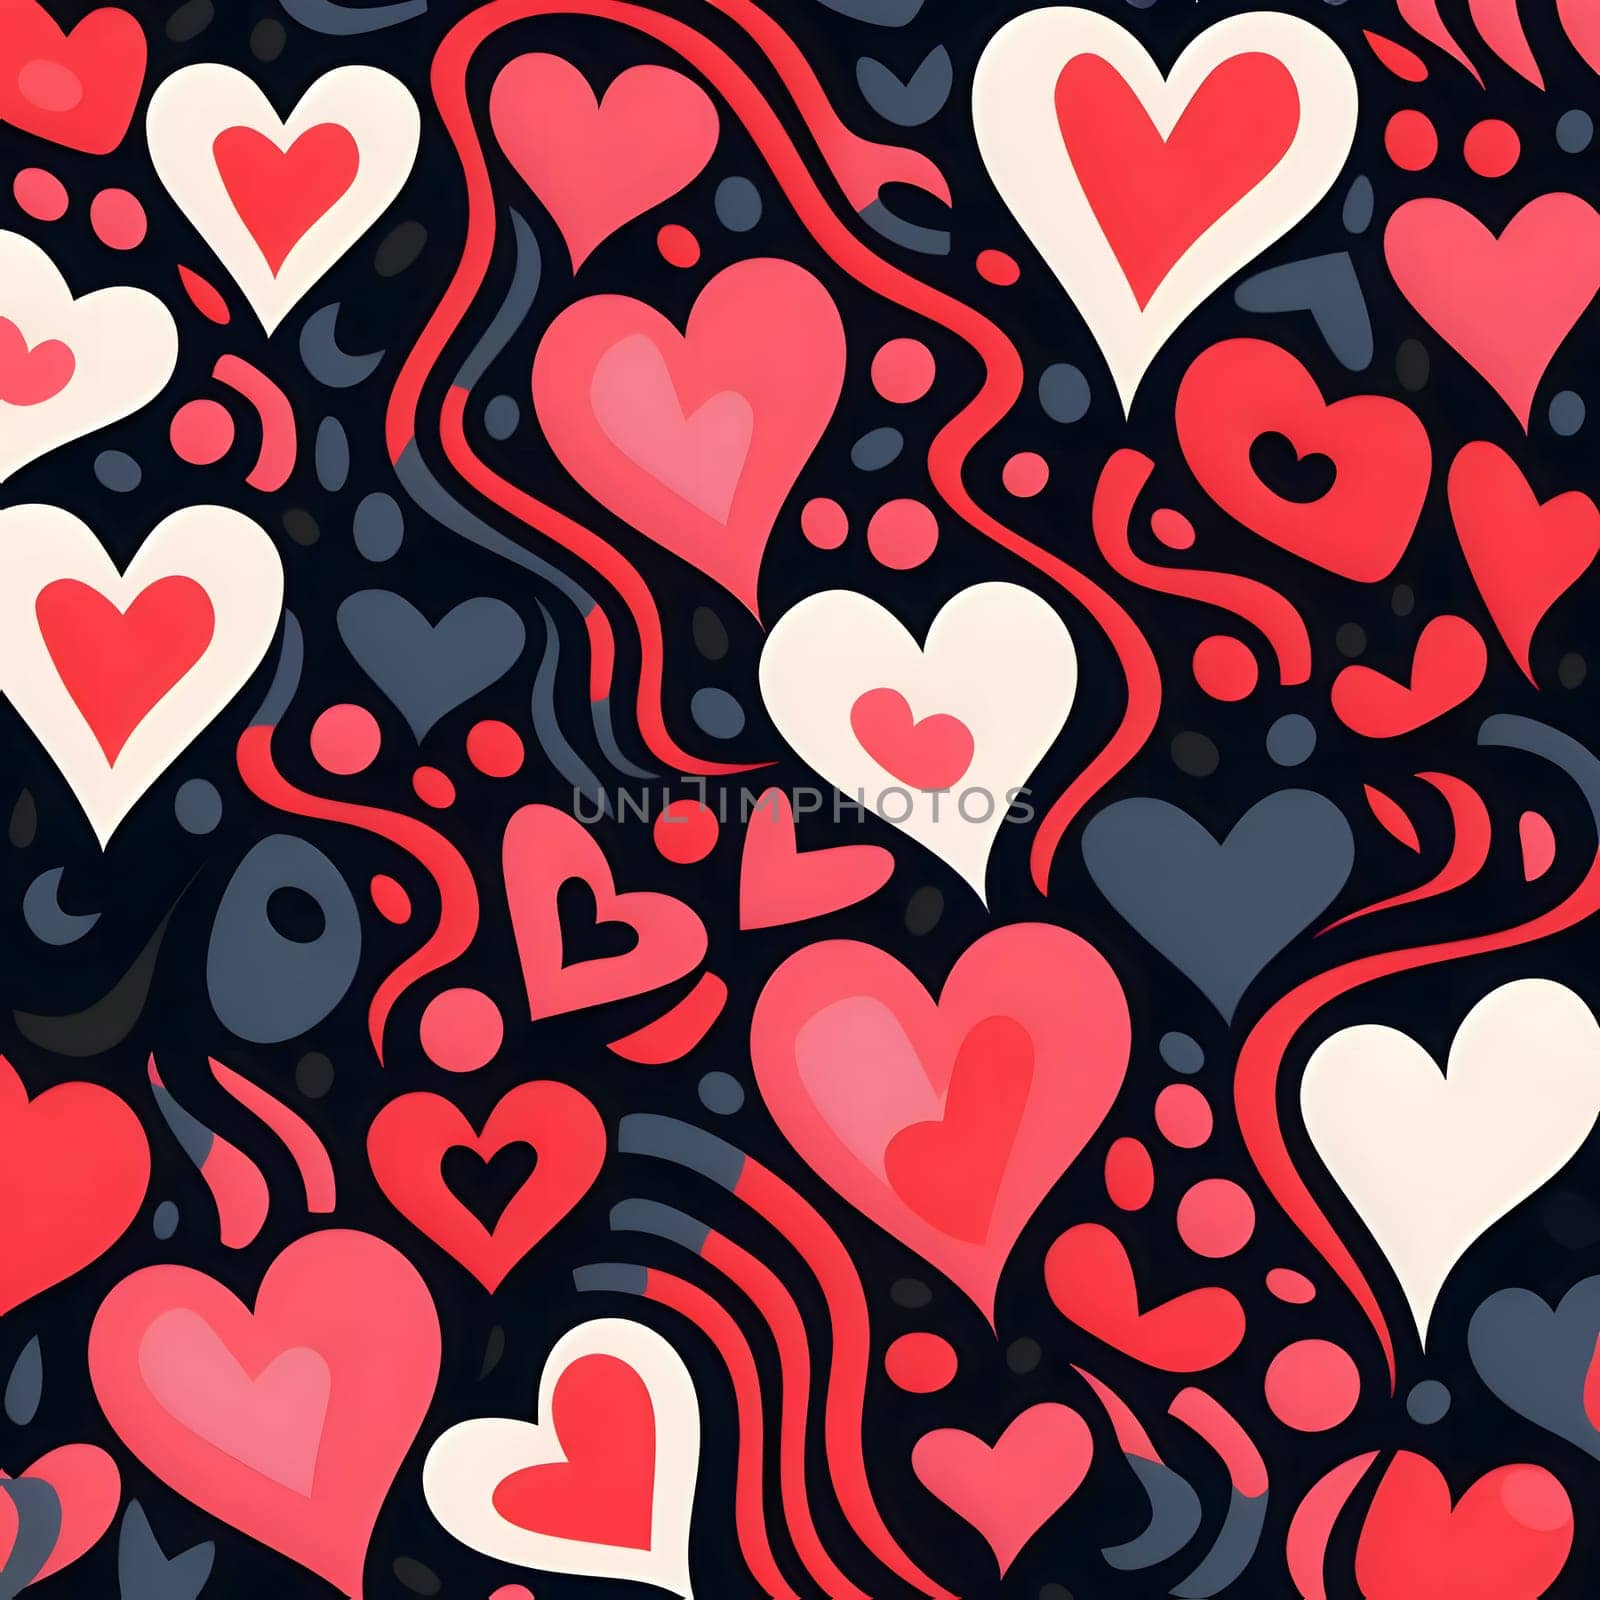 Patterns and banners backgrounds: Seamless vector pattern with hearts. Valentine's day background.